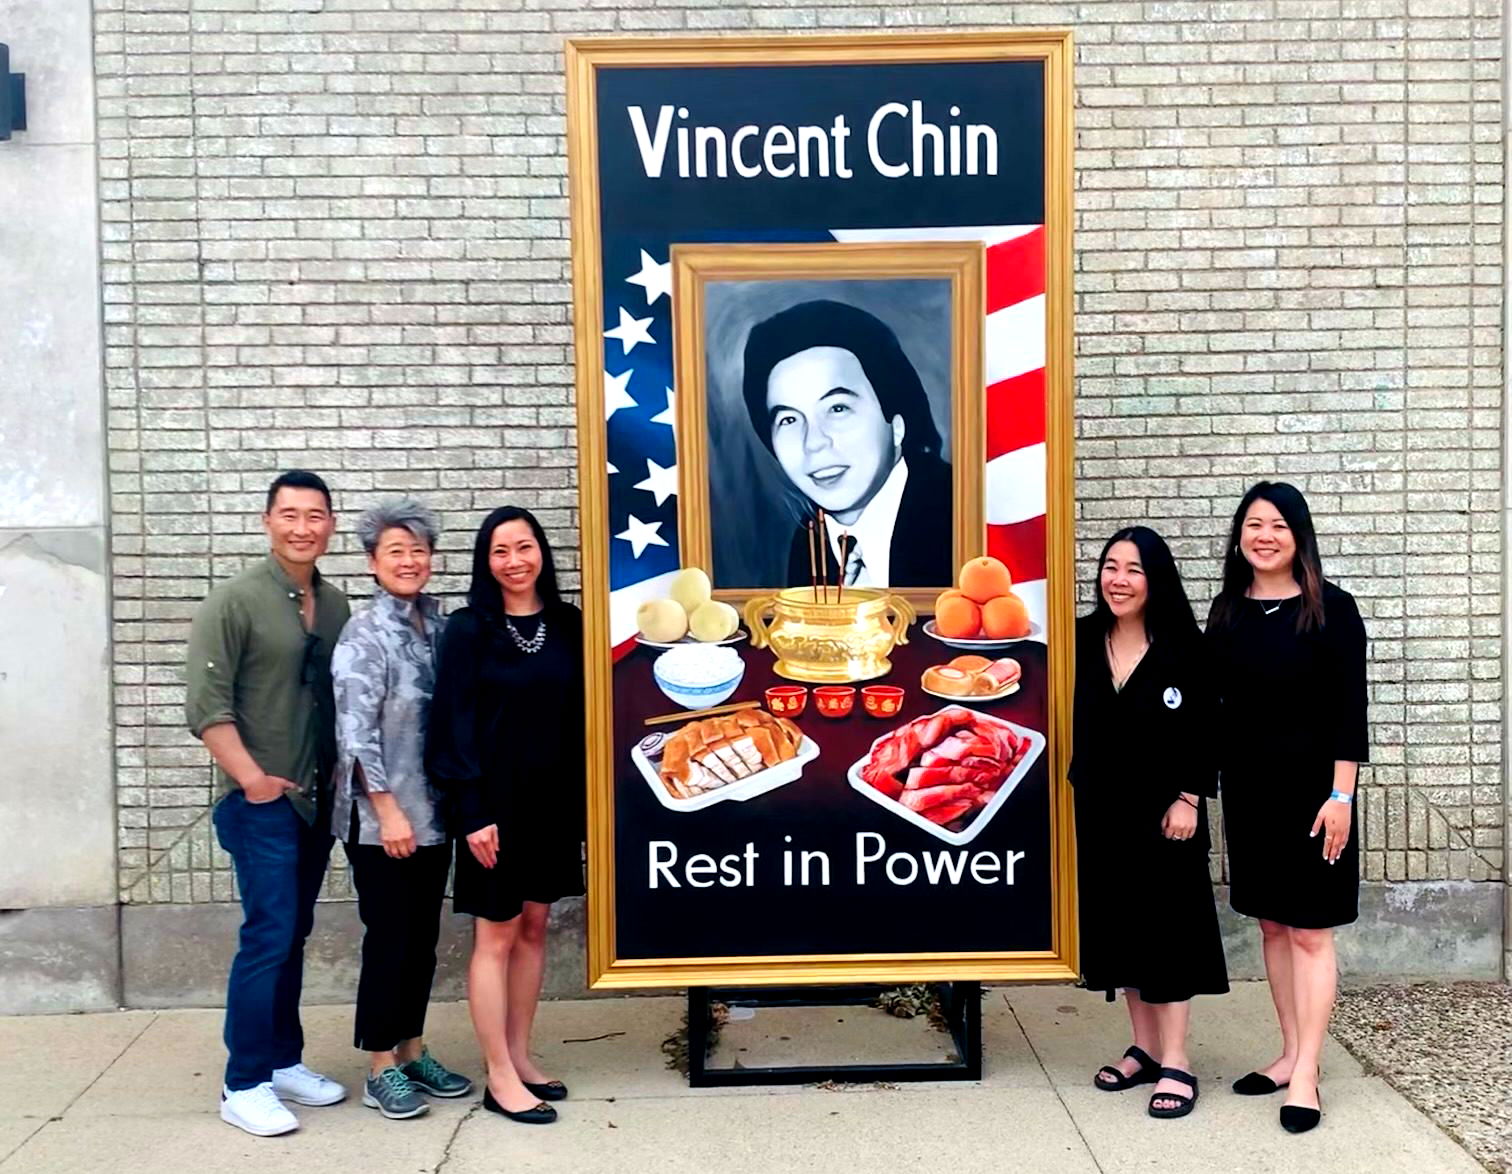 Opinion: Sustaining the movement that Vincent Chin inspired